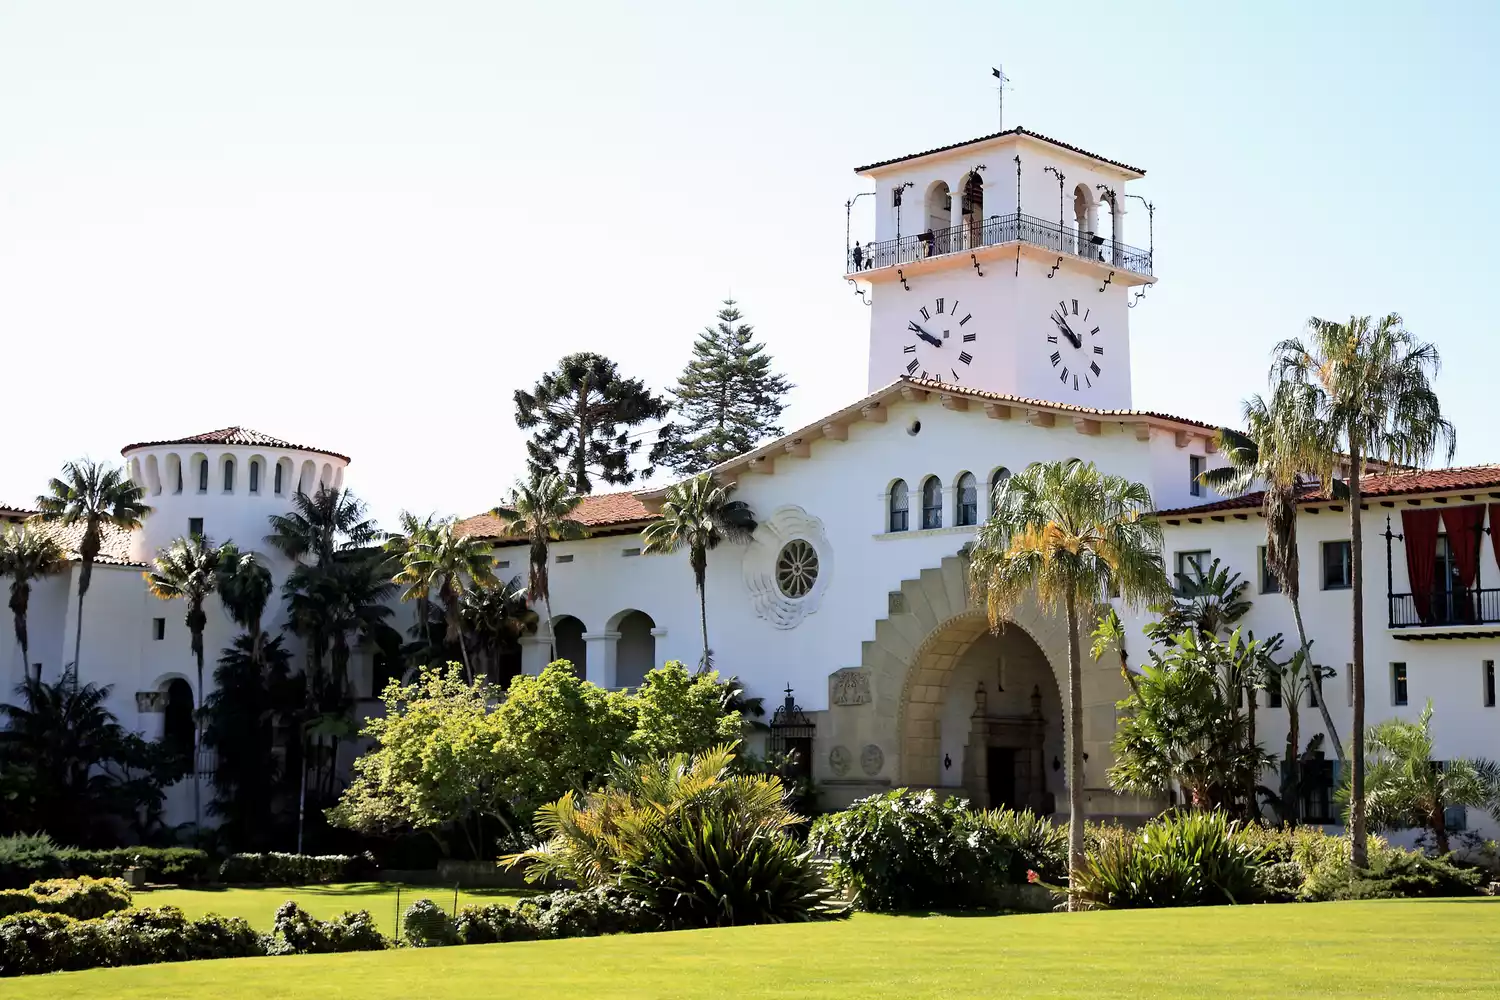 Exterior view of green lawn and trees outside Santa Barbara Courthouse.